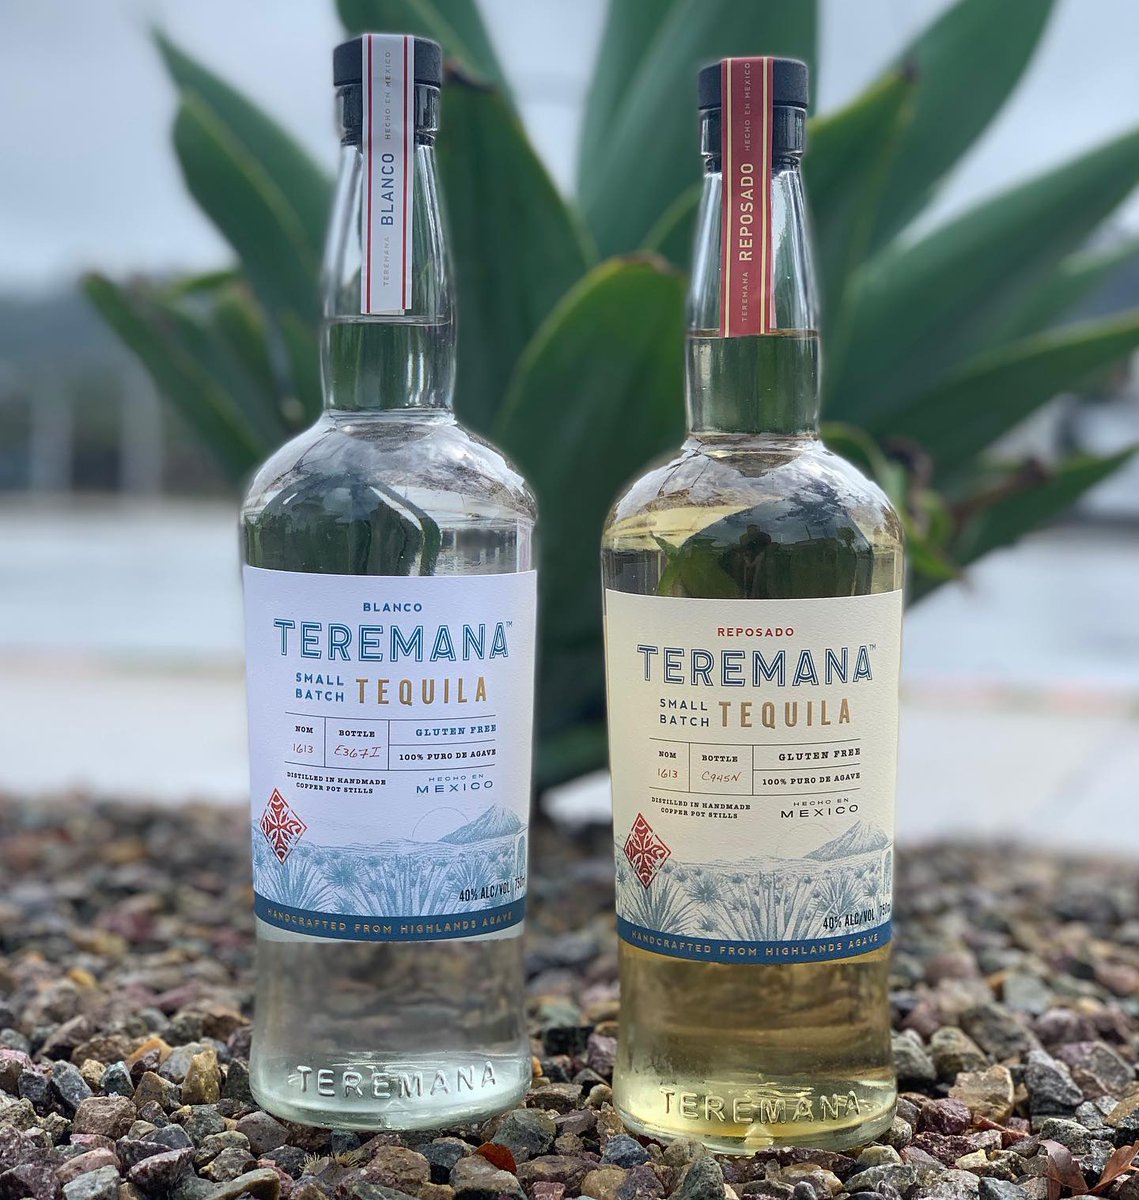 Del Mesa Liquor Go One On One With The Great One S Teremana Tequila Therock S Ultra Premium Small Batch Highlands Teremanatequila Is Crafted In An Authentic And Uncompromising Manner Truly The Tequila